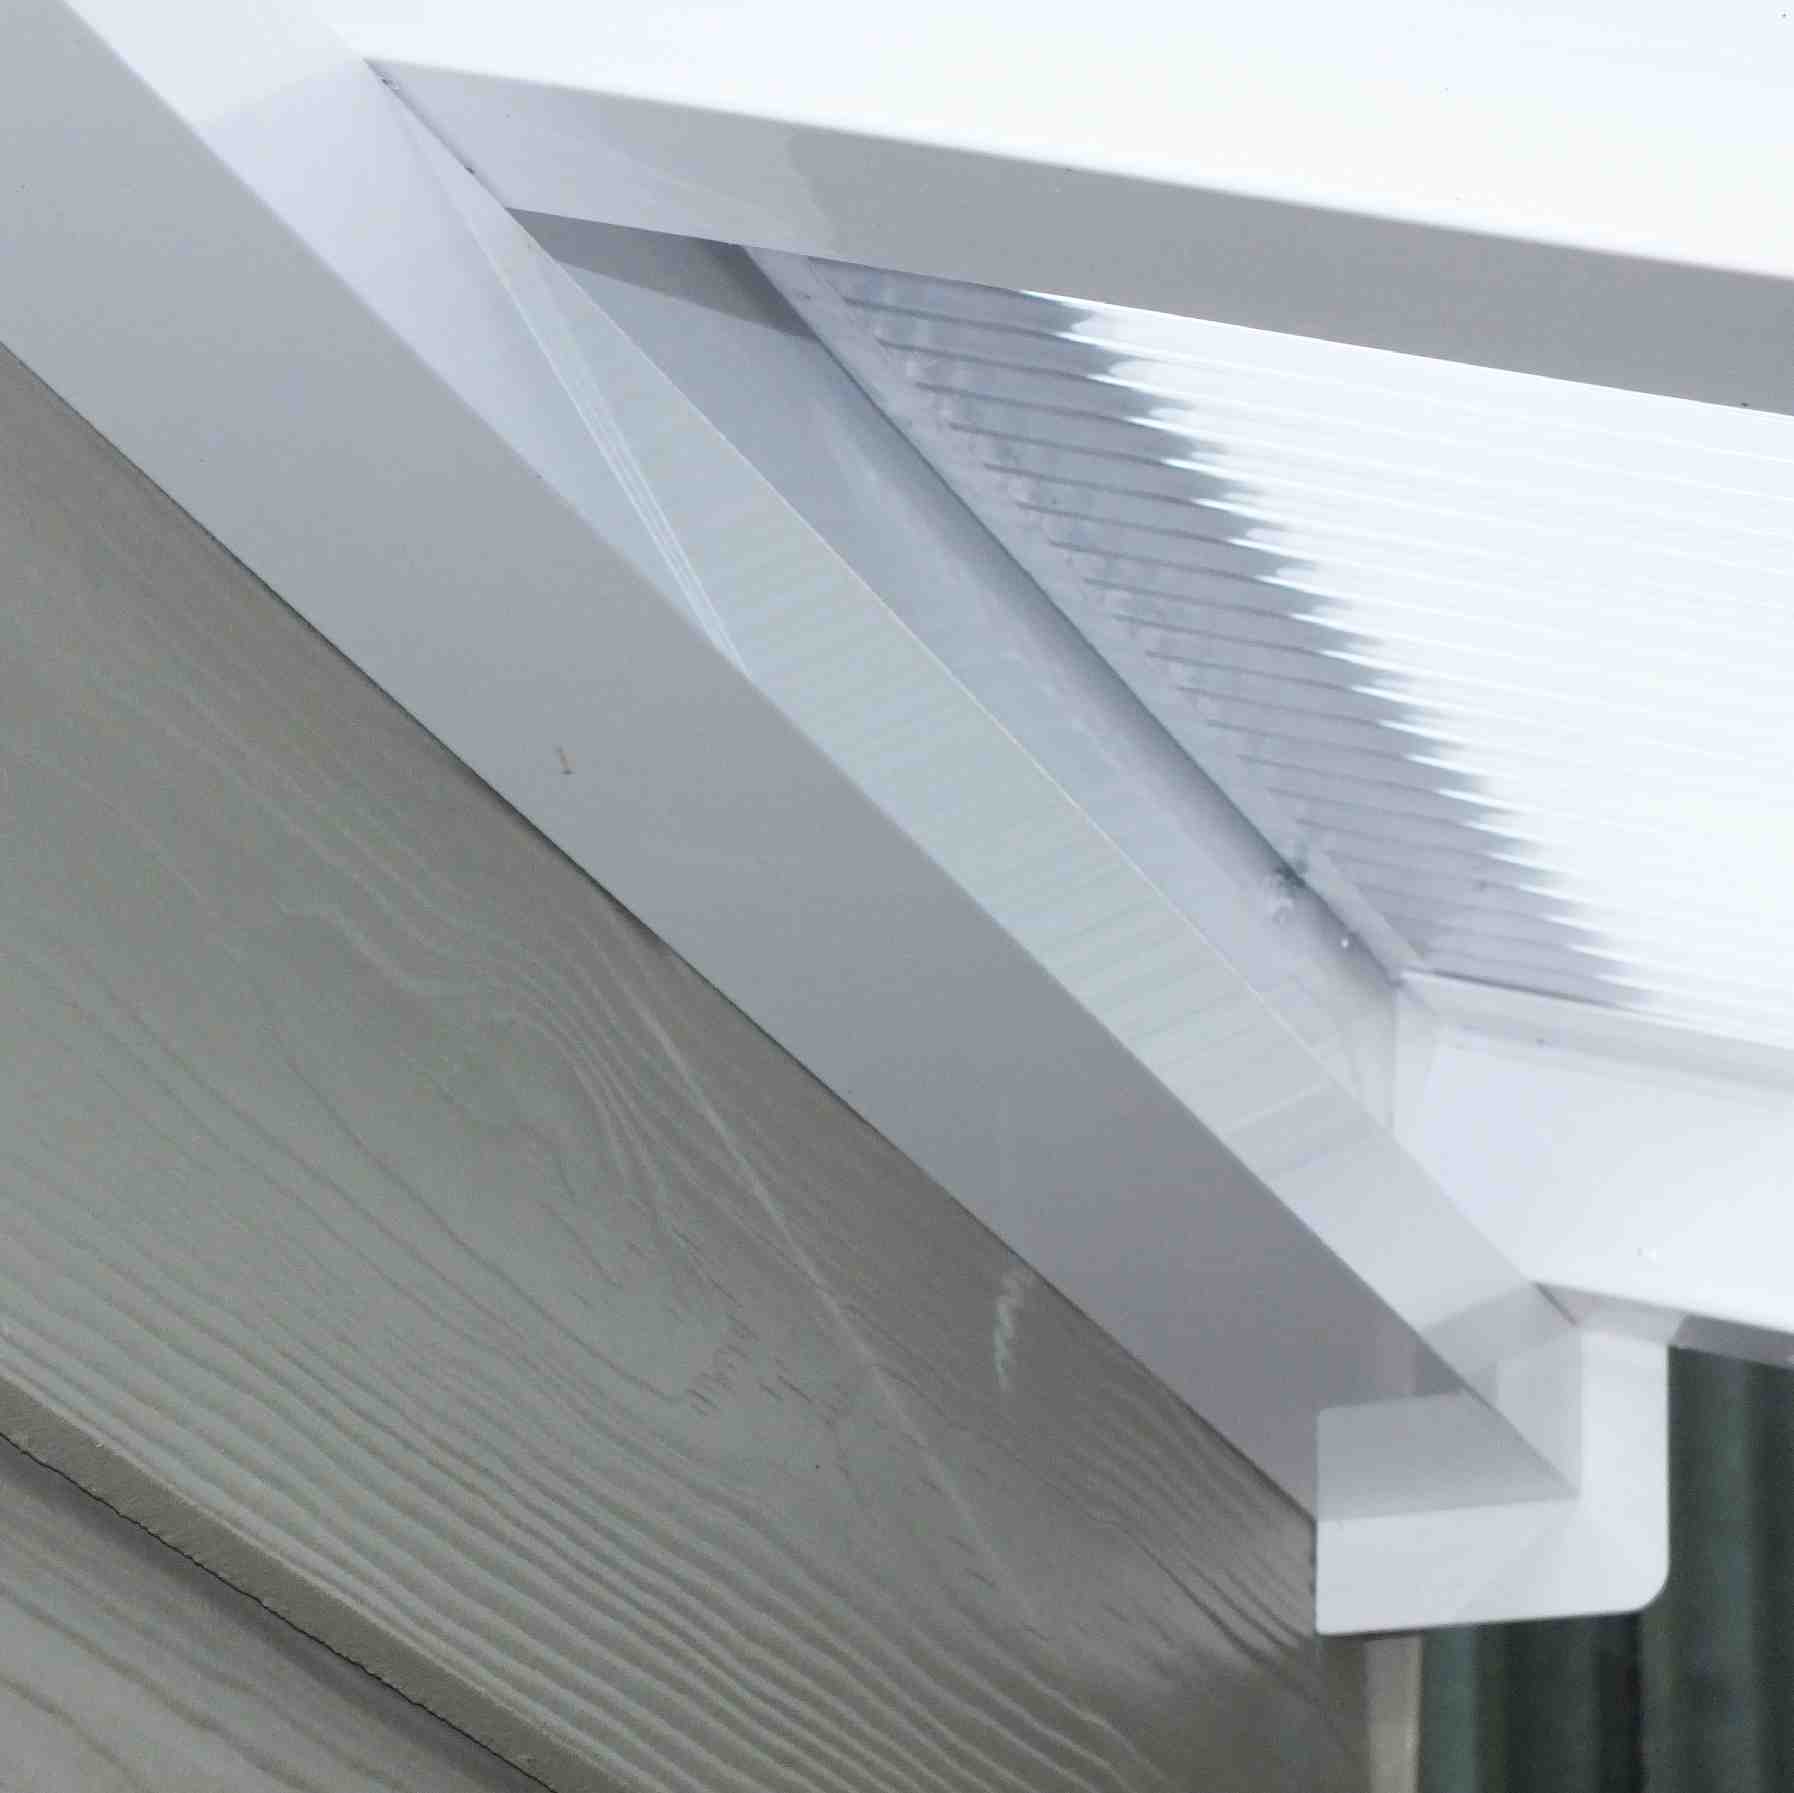 Great deals on Omega Verandah White with 6mm Glass Clear Plate Polycarbonate Glazing - 9.8m (W) x 3.5m (P), (5) Supporting Posts